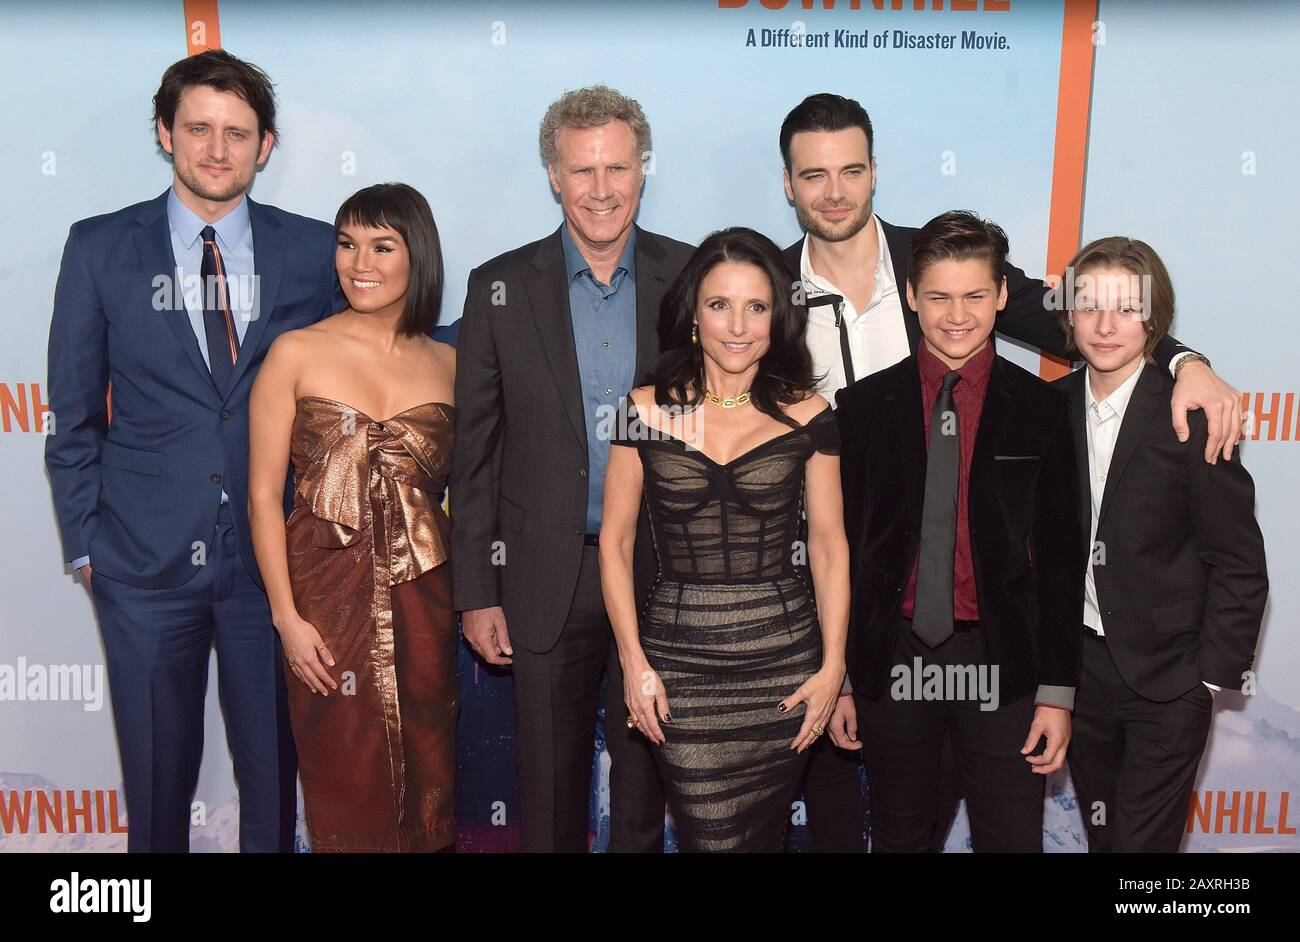 New York, USA. 12th Feb, 2020. Zach Woods, Jim Rash, Nat Faxon, Zoe Chao, Julia Louis-Dreyfus, Will Ferrell, Giulio Berruti, Ammon Jacob Ford and Julian Grey attend the premiere of 'Downhill' at SVA Theater on February 12, 2020 in New York City. Photo: Jeremy Smith/imageSPACE/MediaPunch Credit: MediaPunch Inc/Alamy Live News Stock Photo